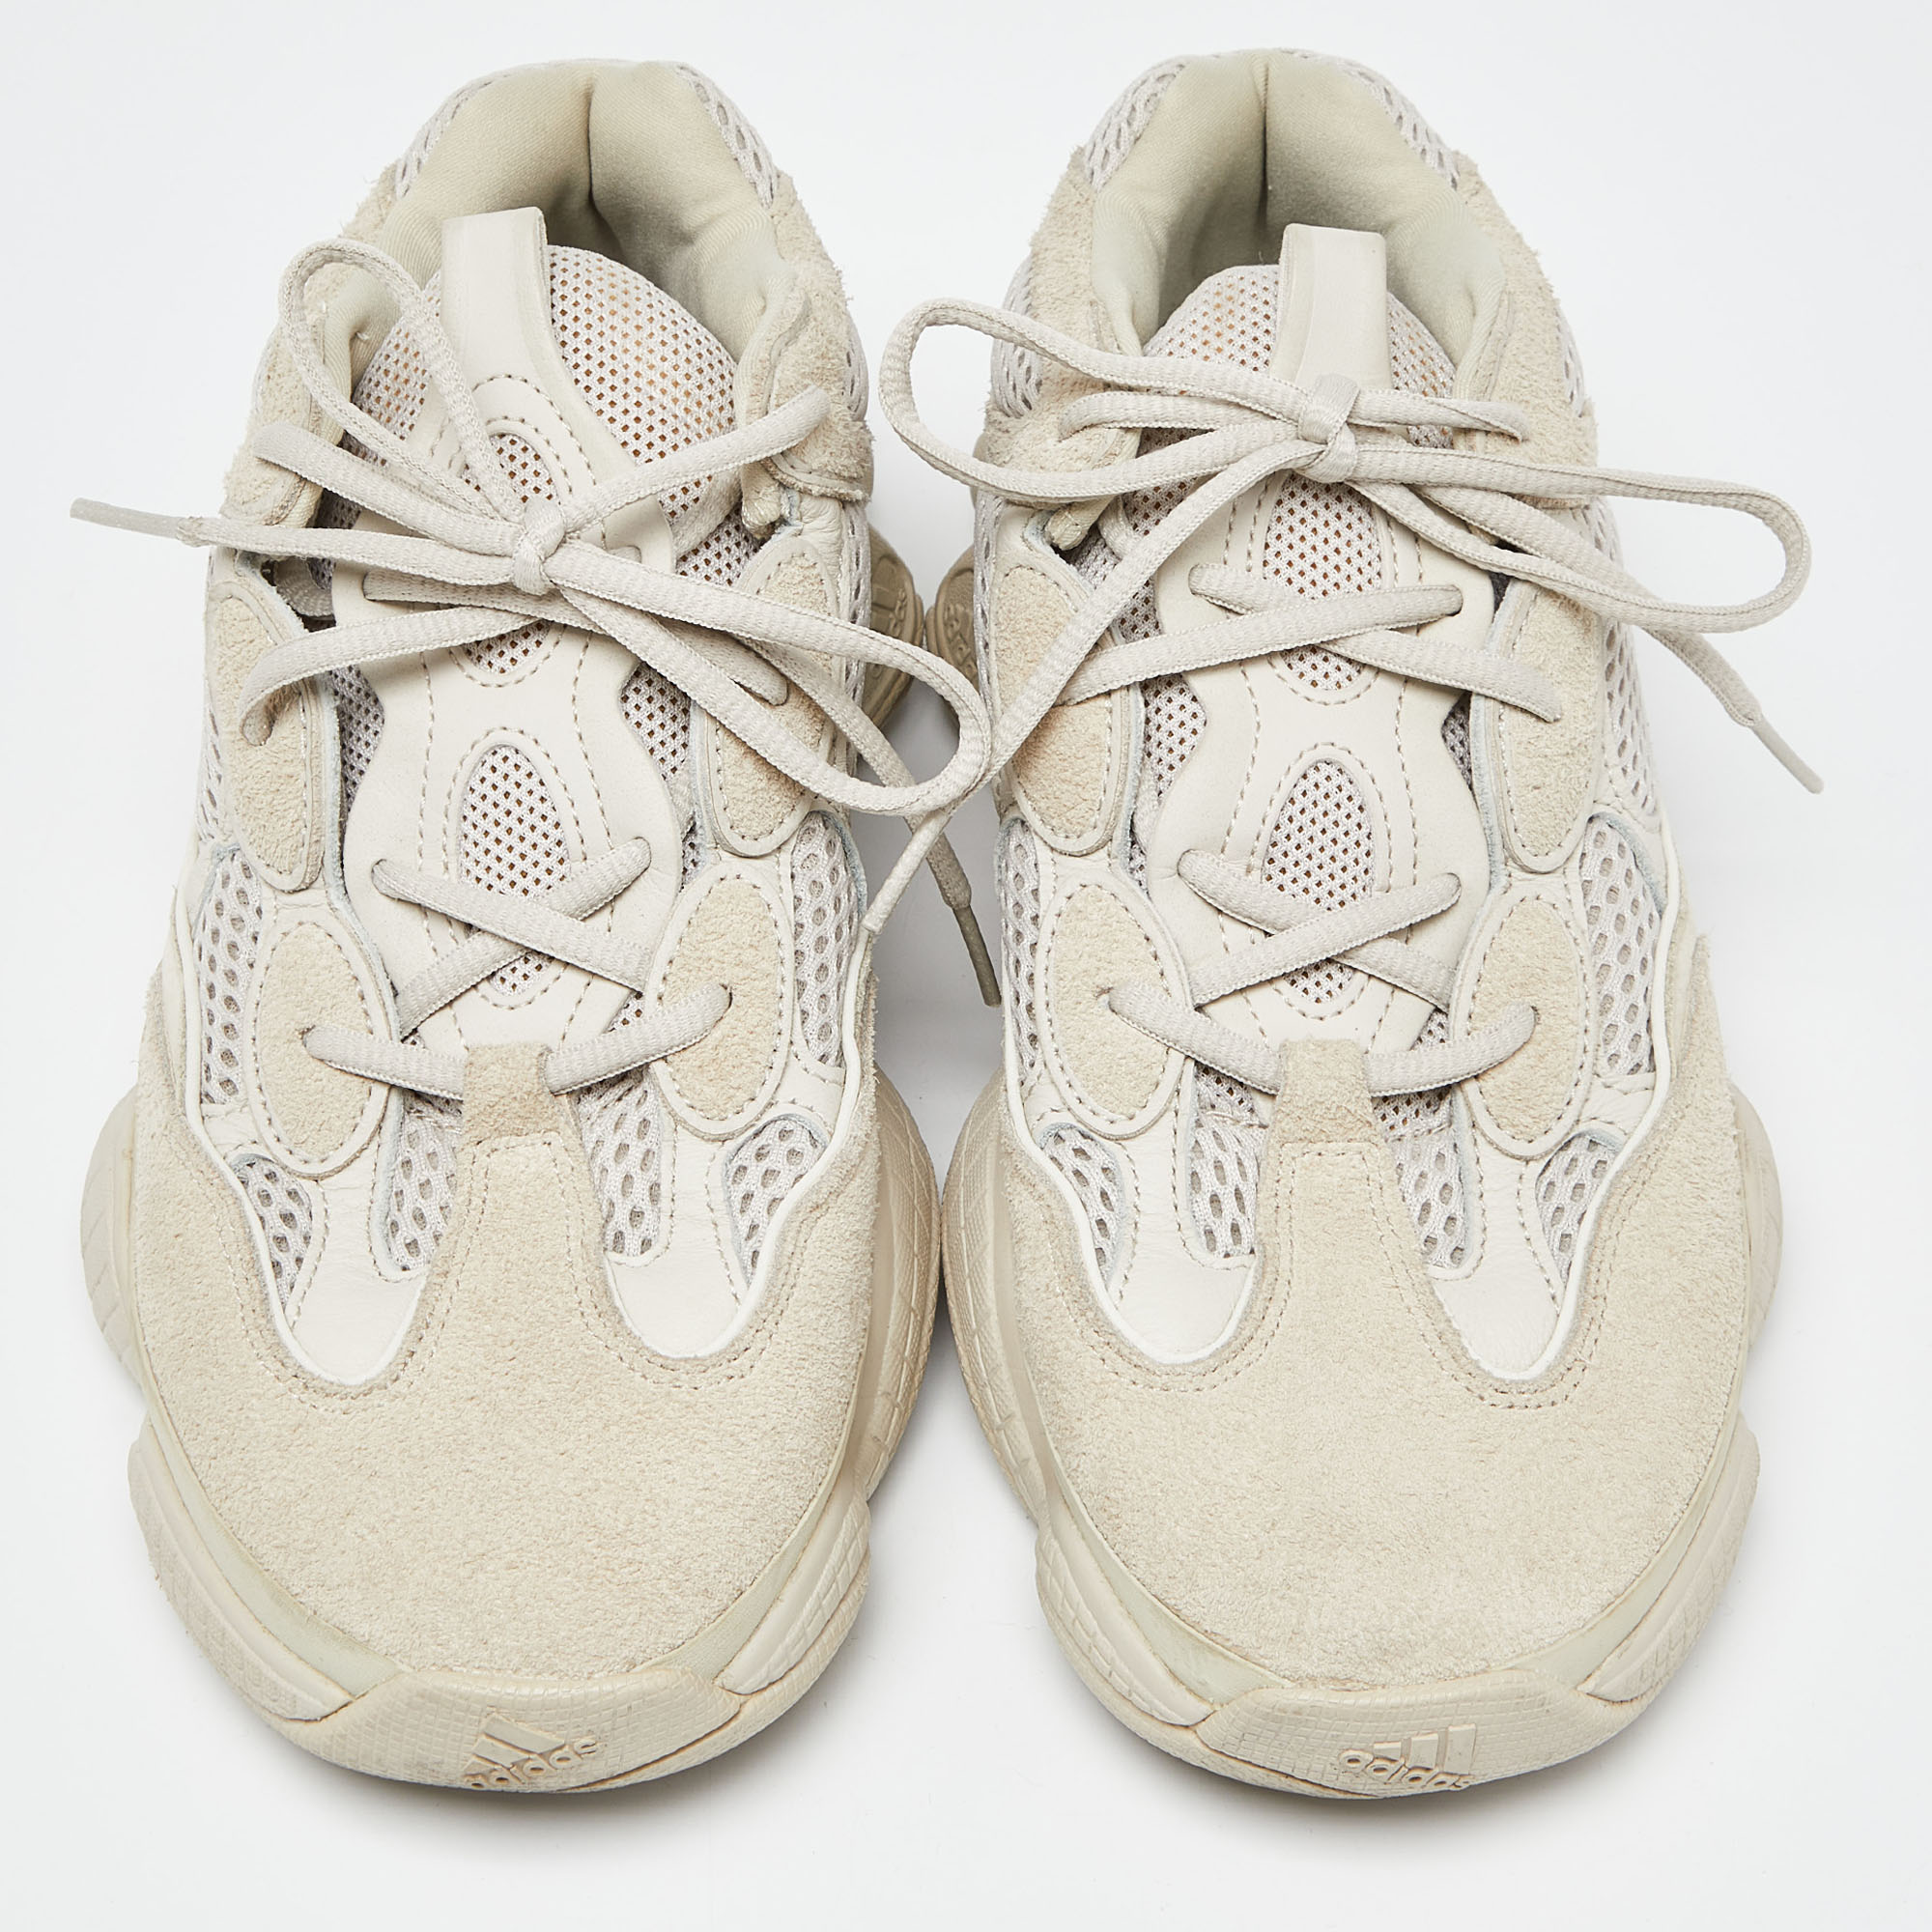 Yeezy X Adidas Cream Suede And Mesh Yeezy 500 Blush Sneakers Size 42